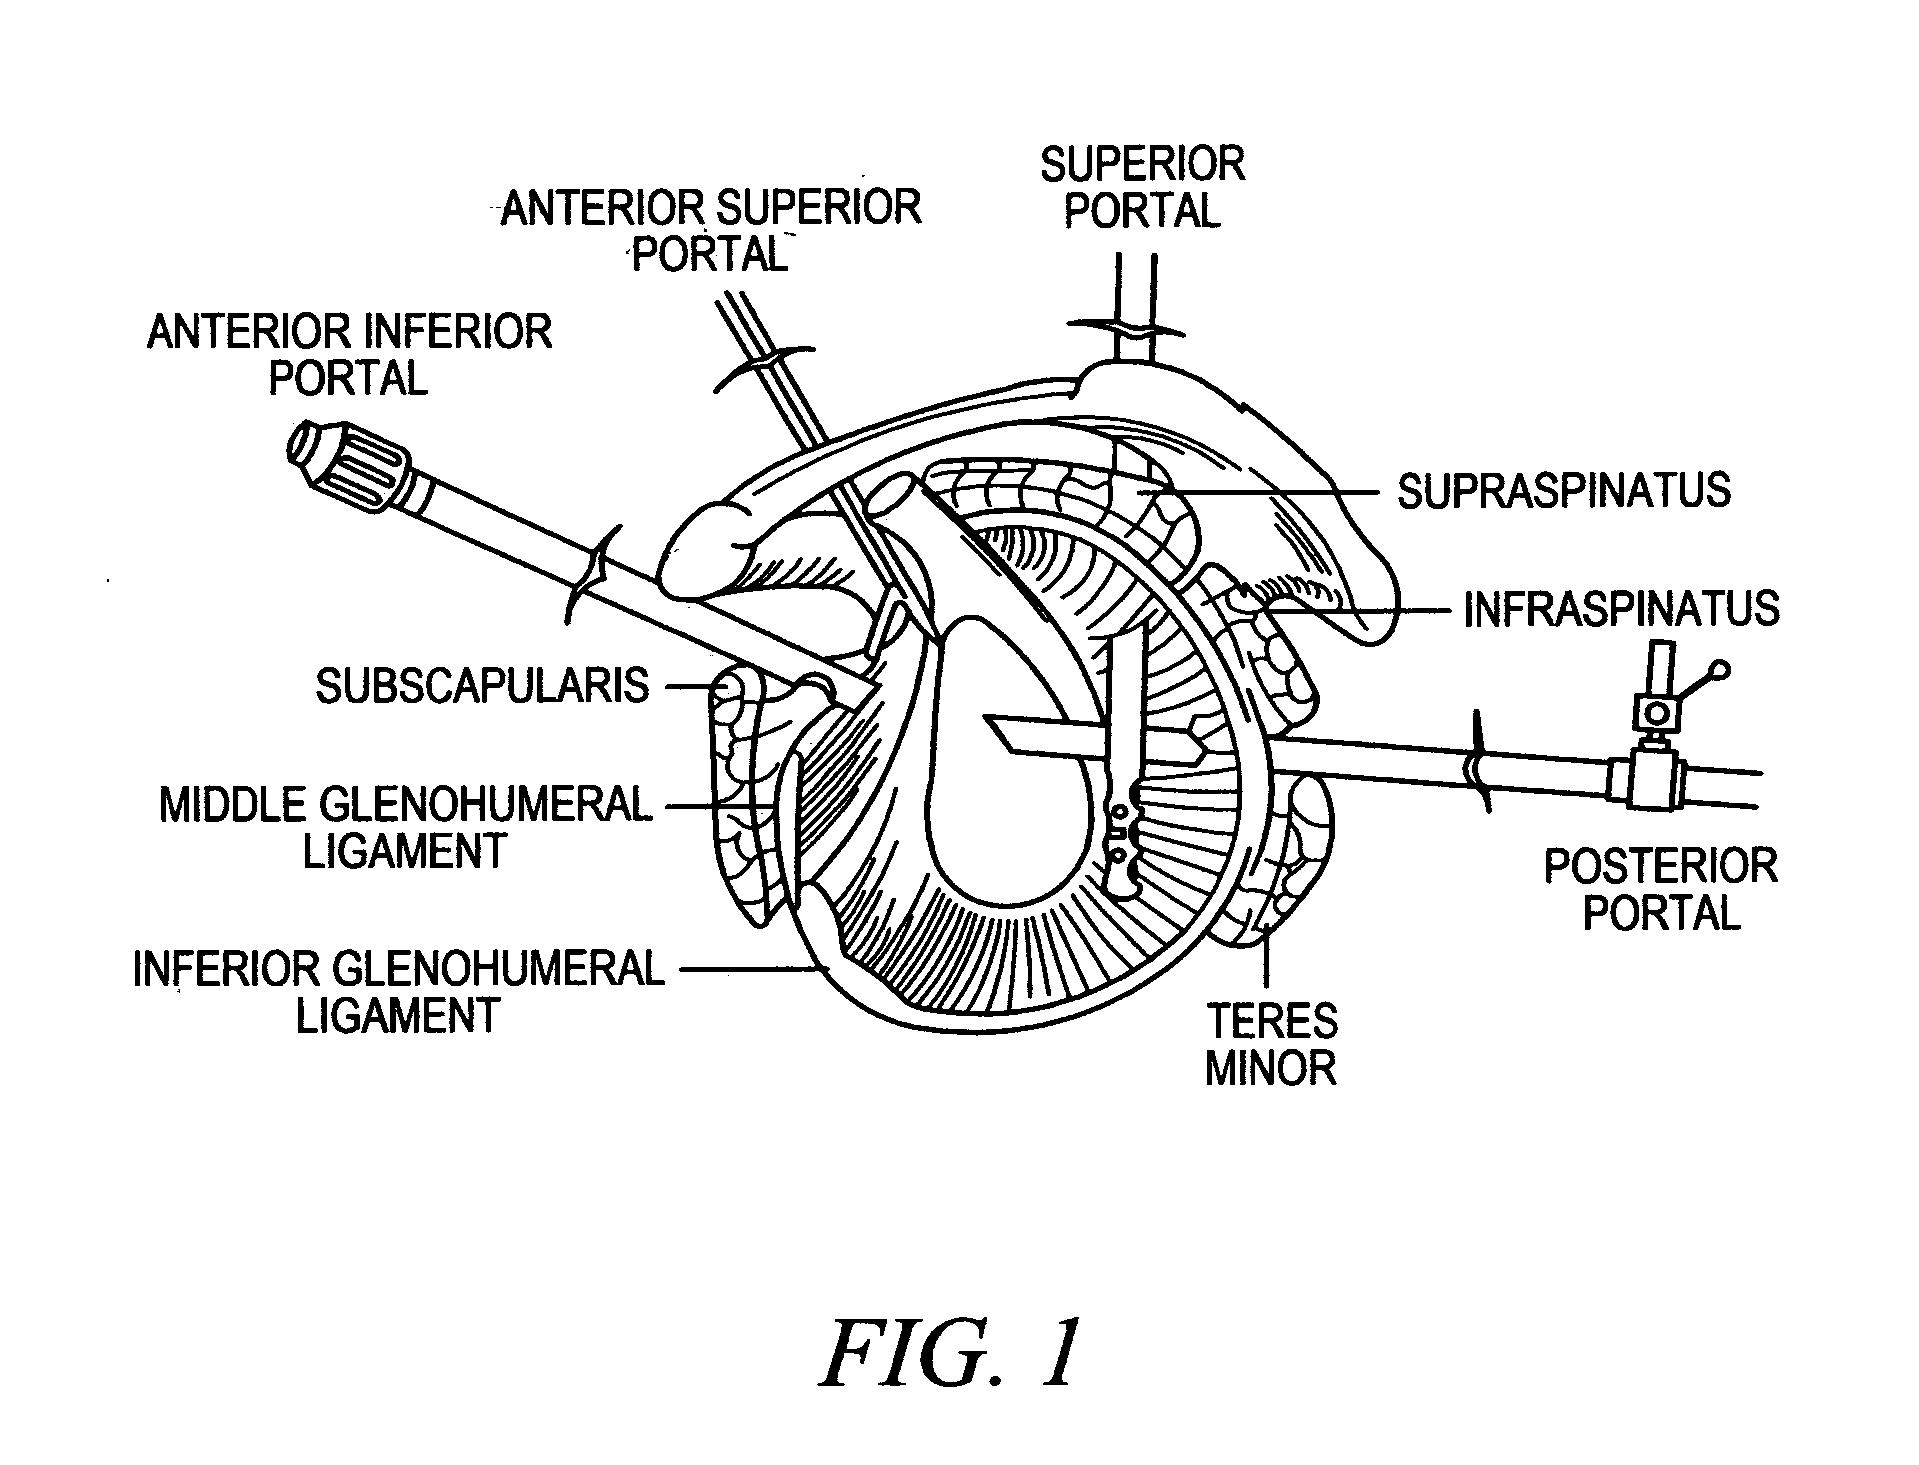 Devices, systems and methods for tissue repair